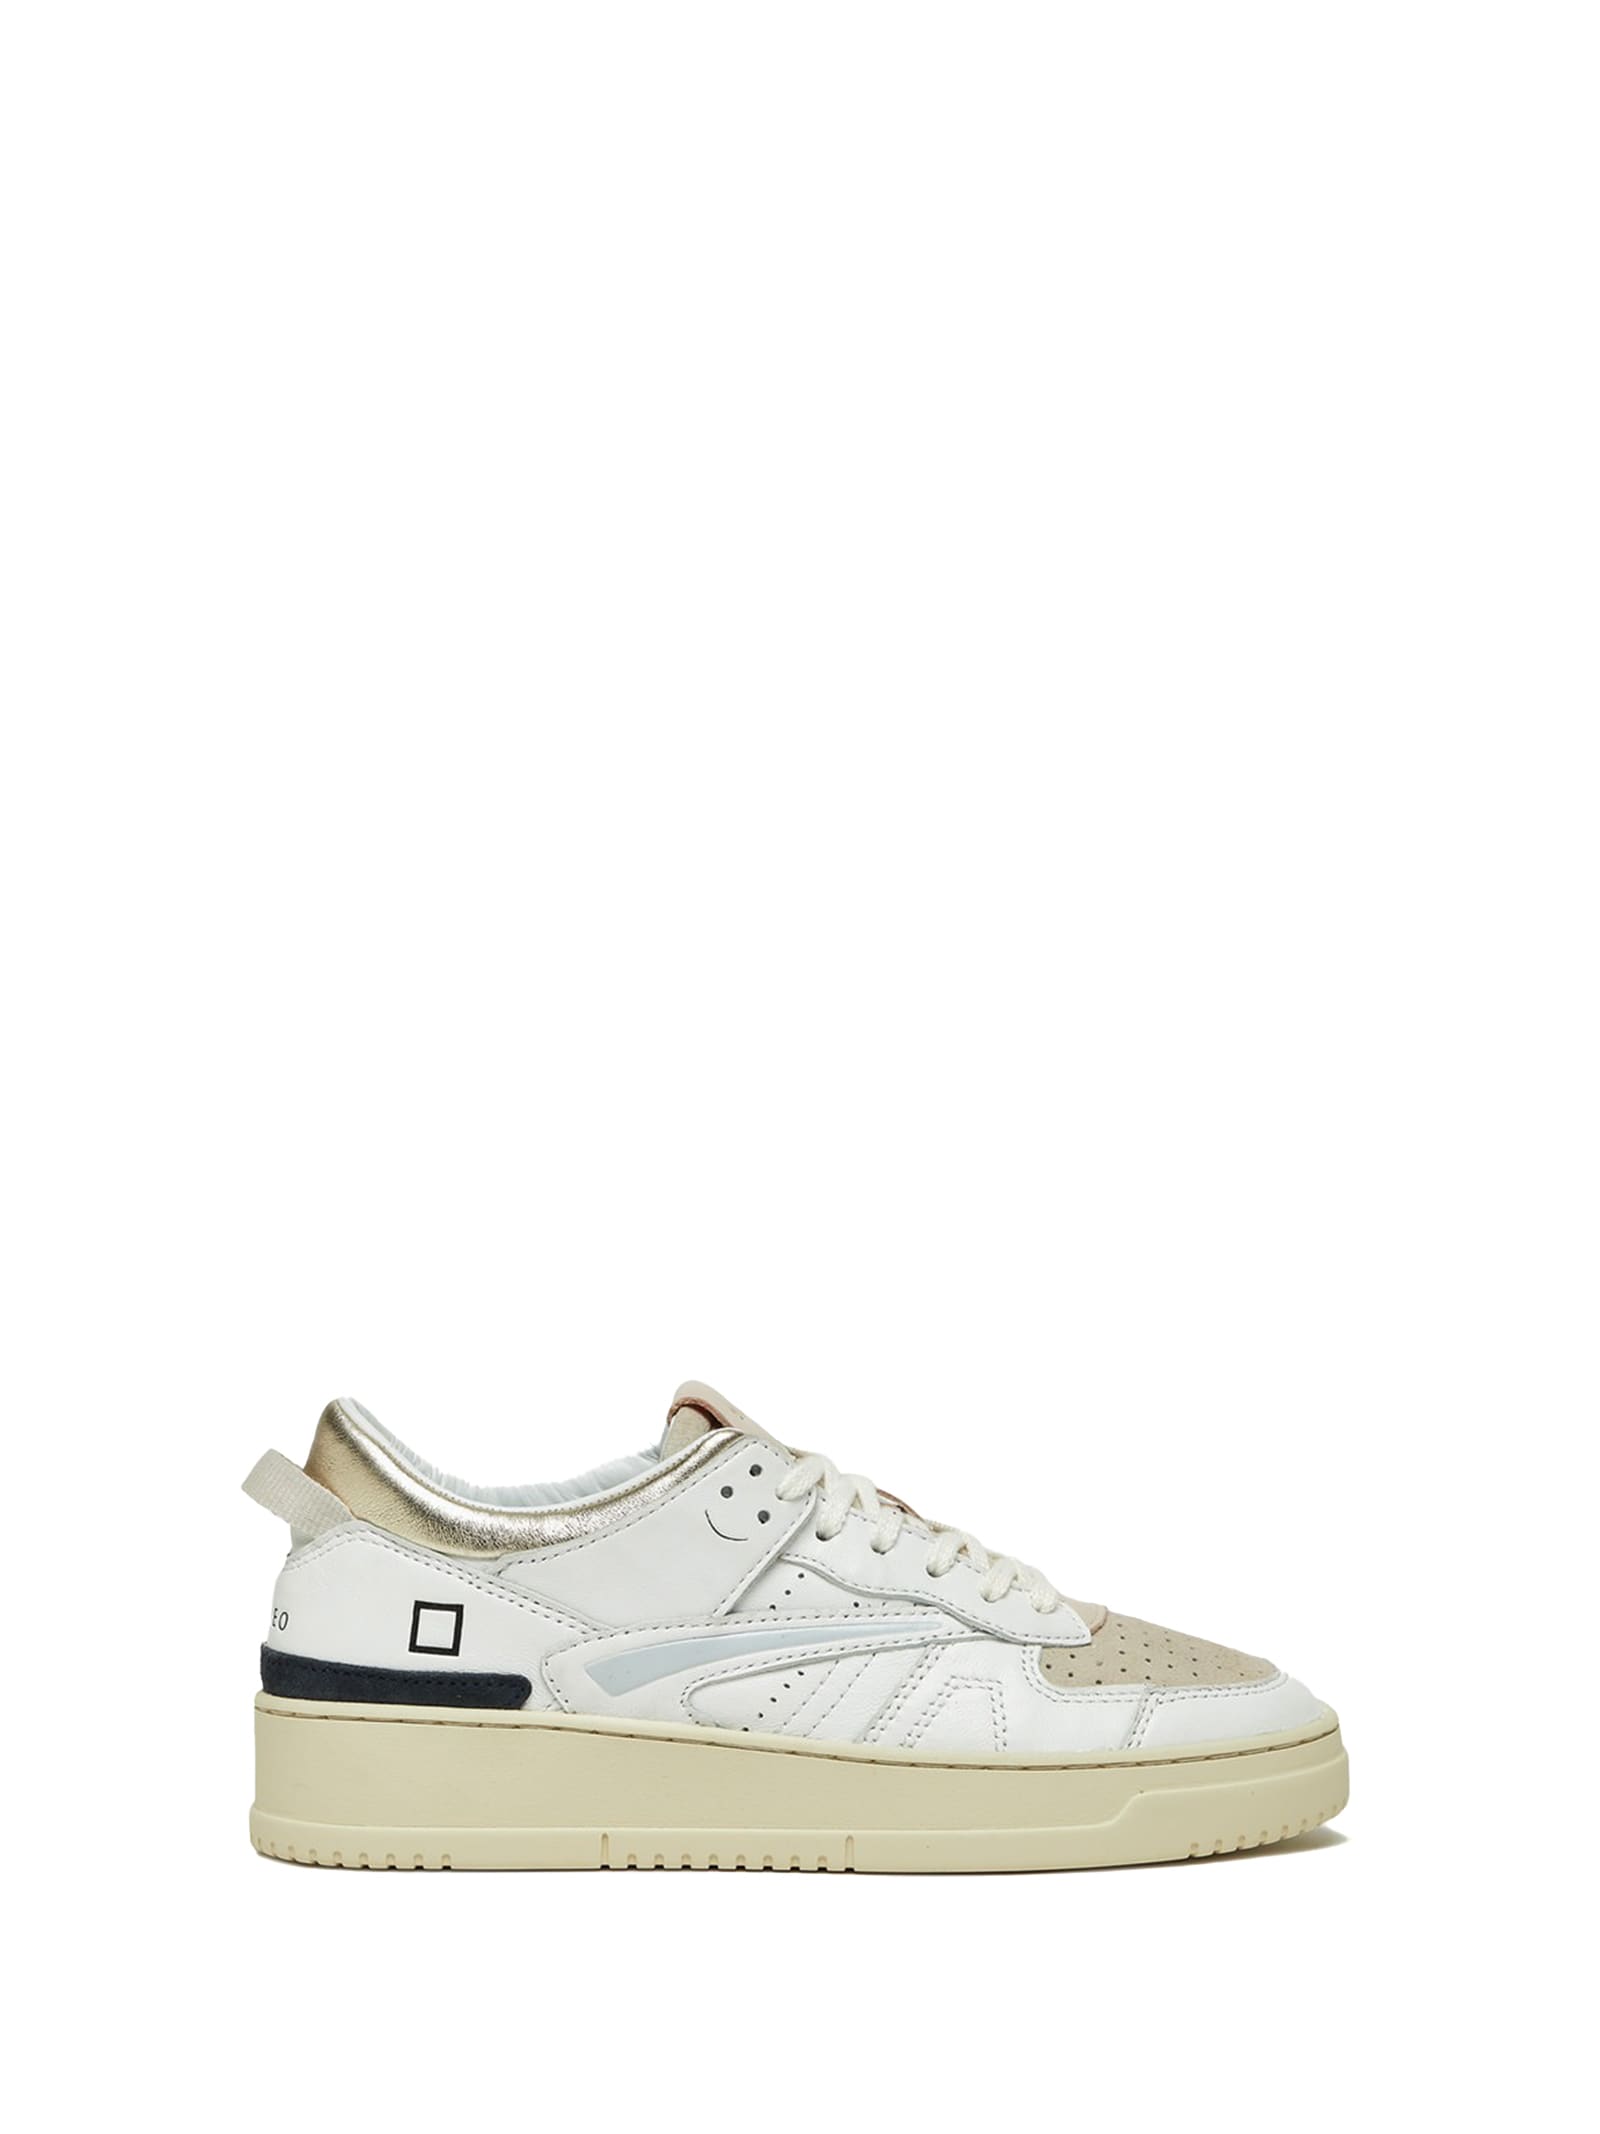 Womens Torneo White Gold Leather Sneaker